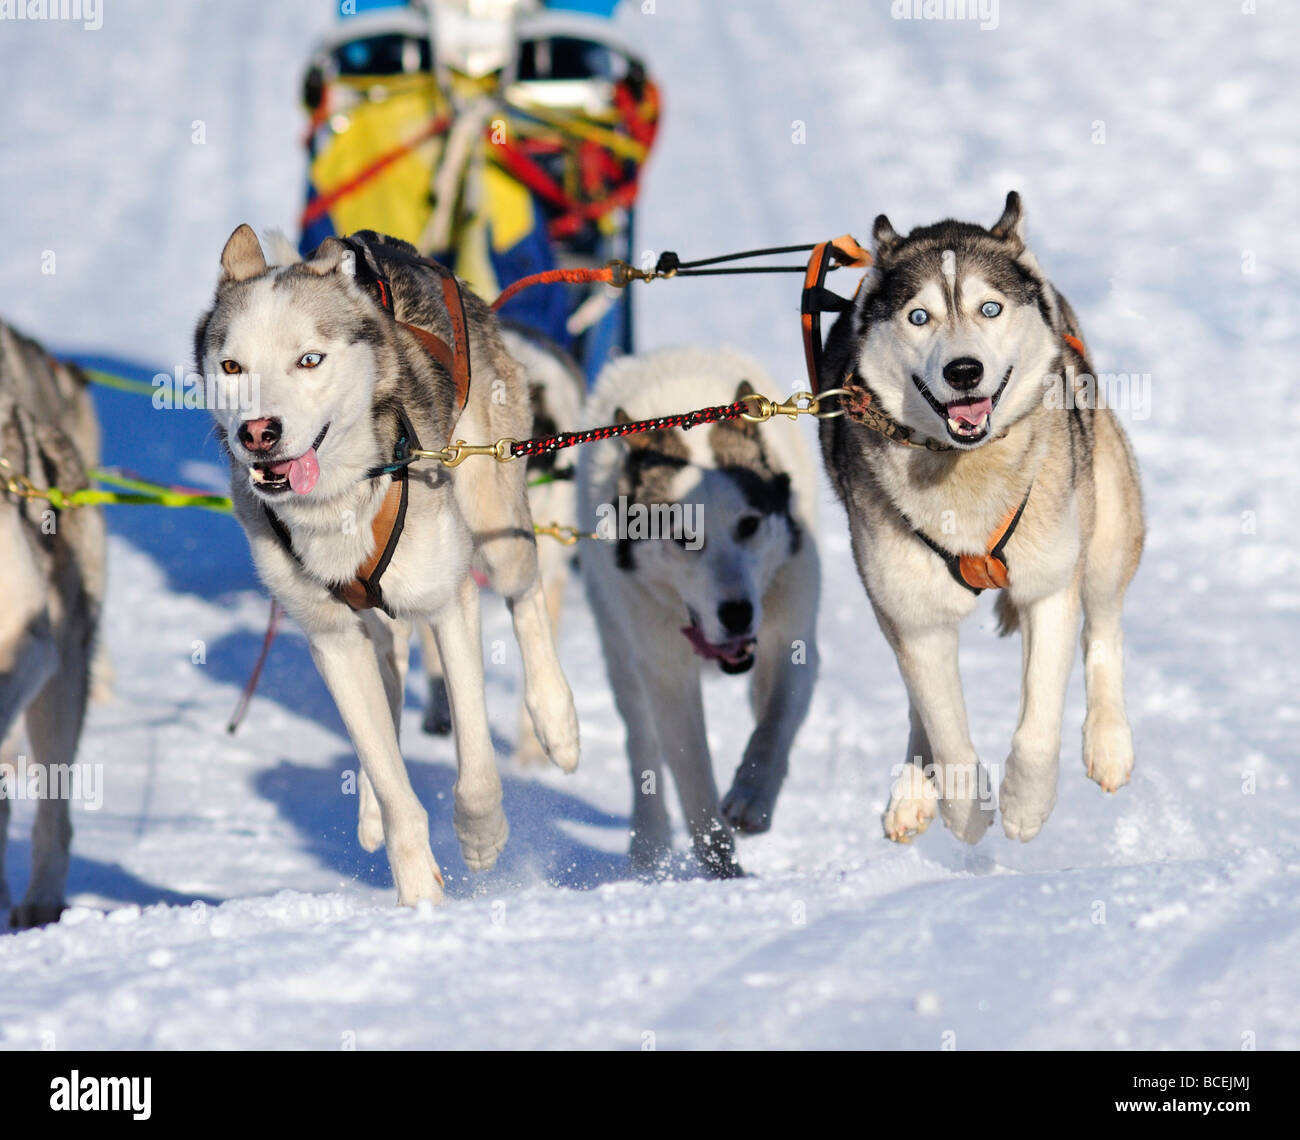 Details of a sled dog team in full action heading towards the camera Stock Photo